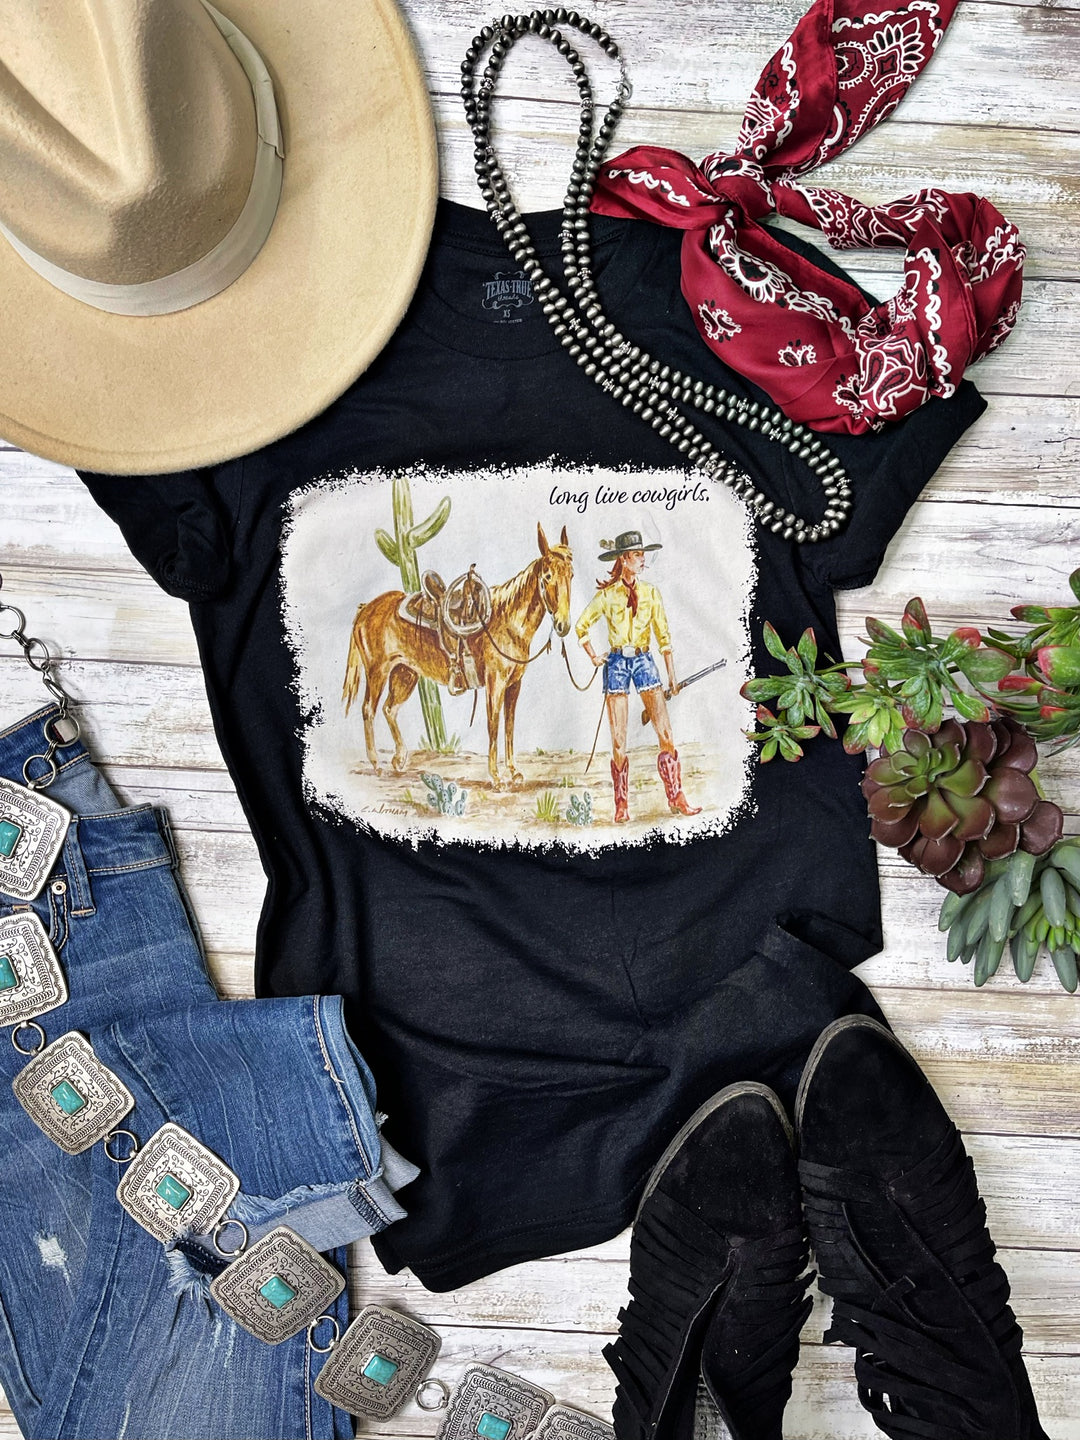 Long Live Cowgirls Tee by Texas True Threads